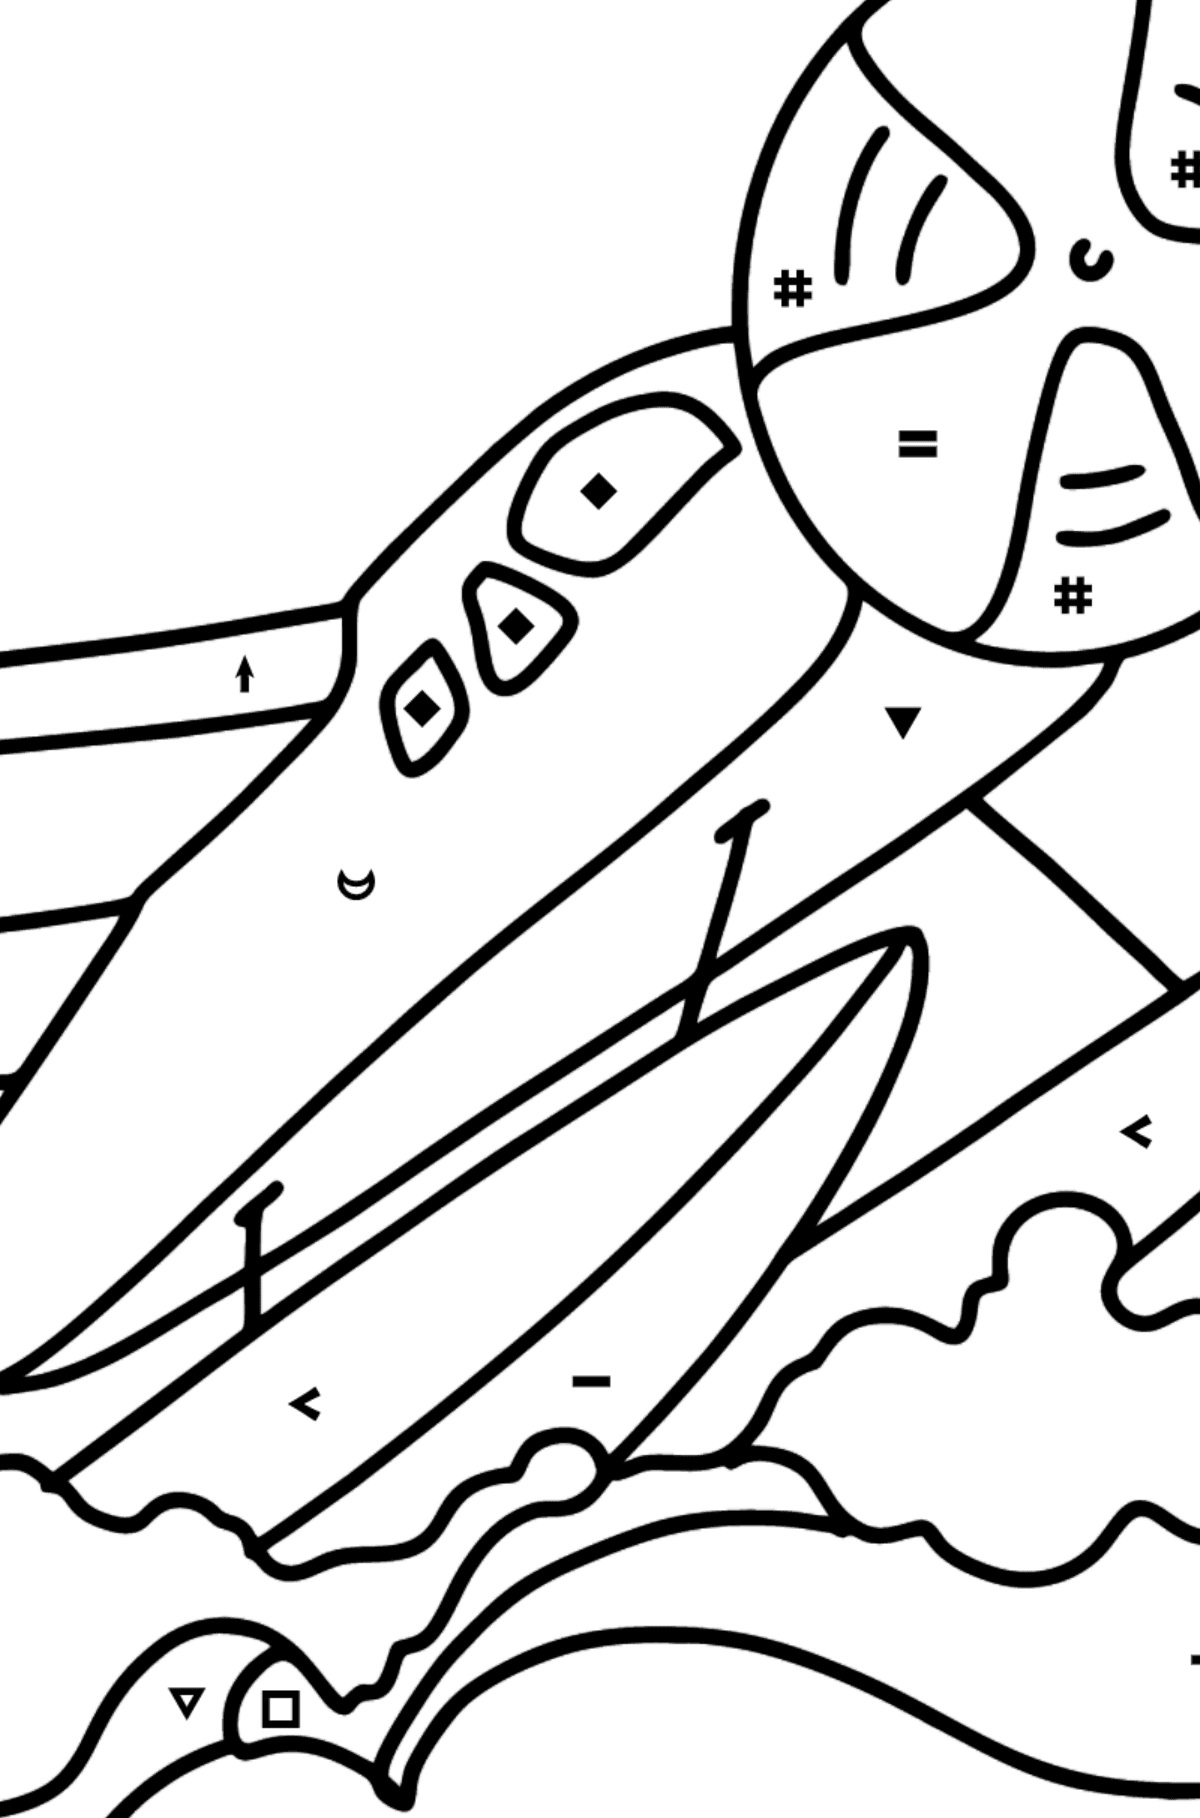 Amphibious Airplane coloring page - Coloring by Symbols for Kids